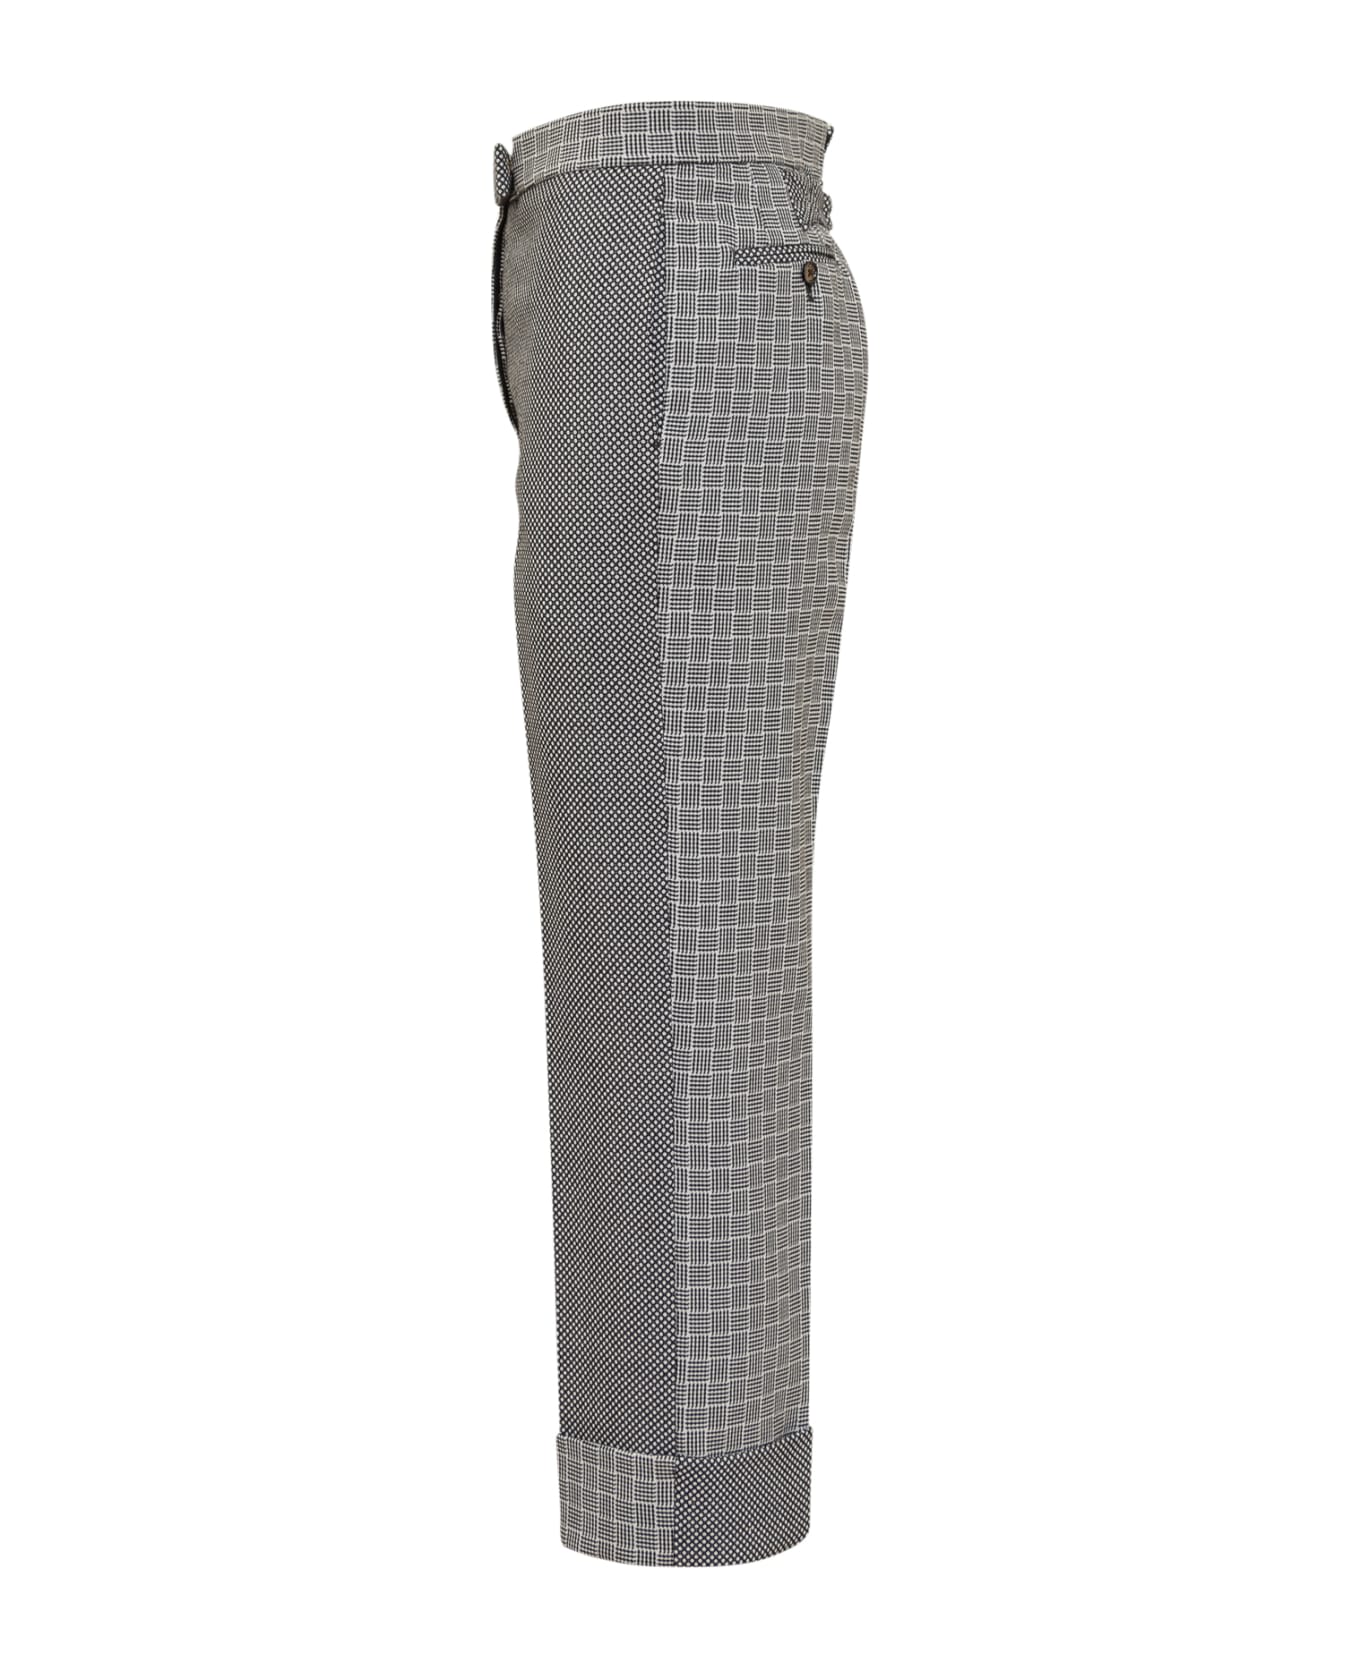 Thom Browne Classic Check Trousers - BLK/WHT